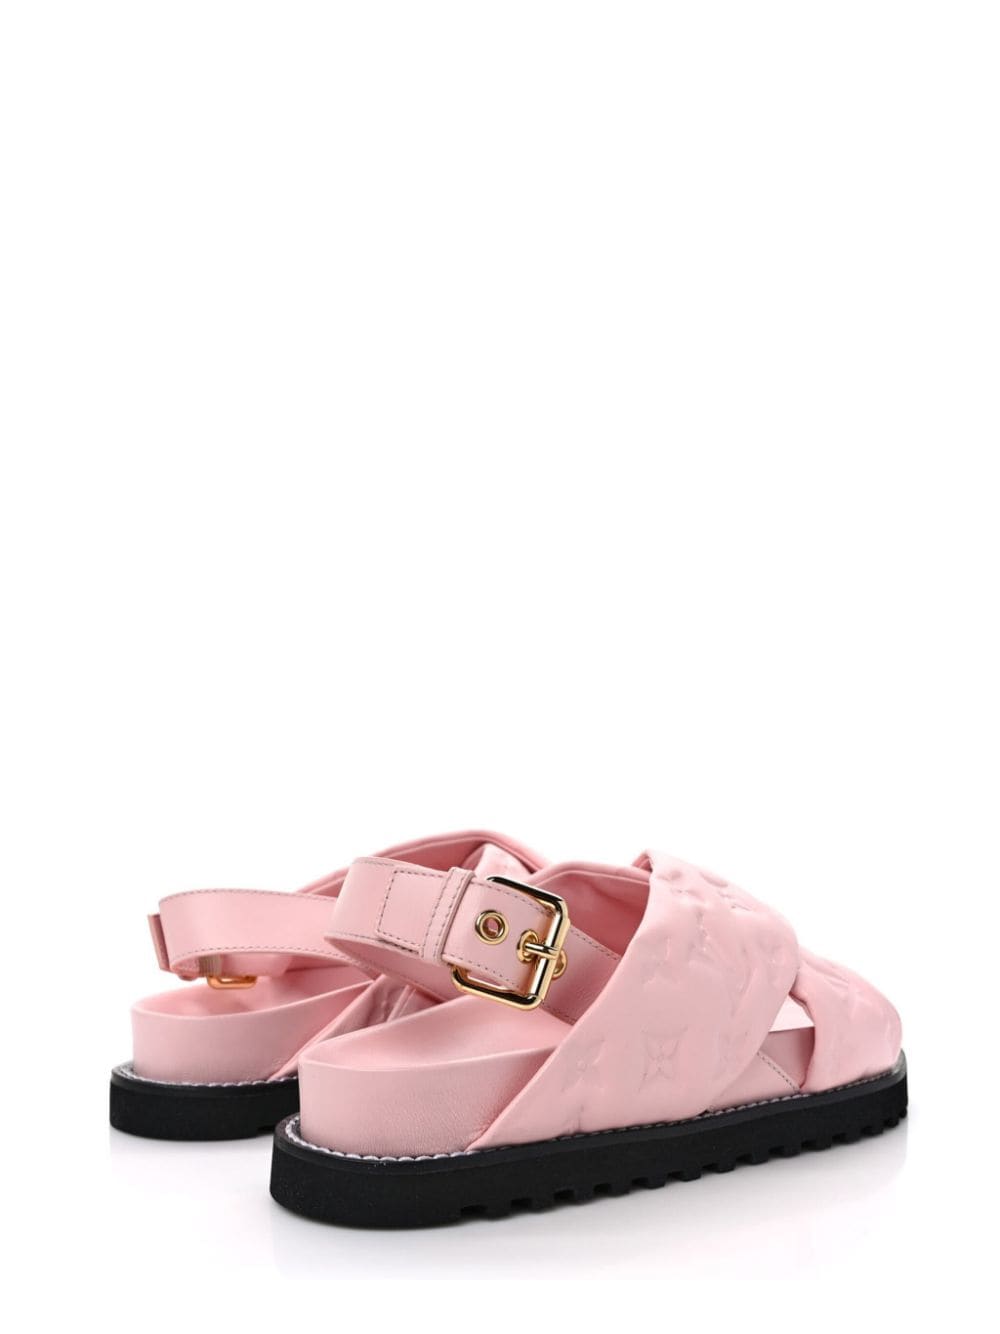 Pre-owned Louis Vuitton Paseo Sandals In Pink